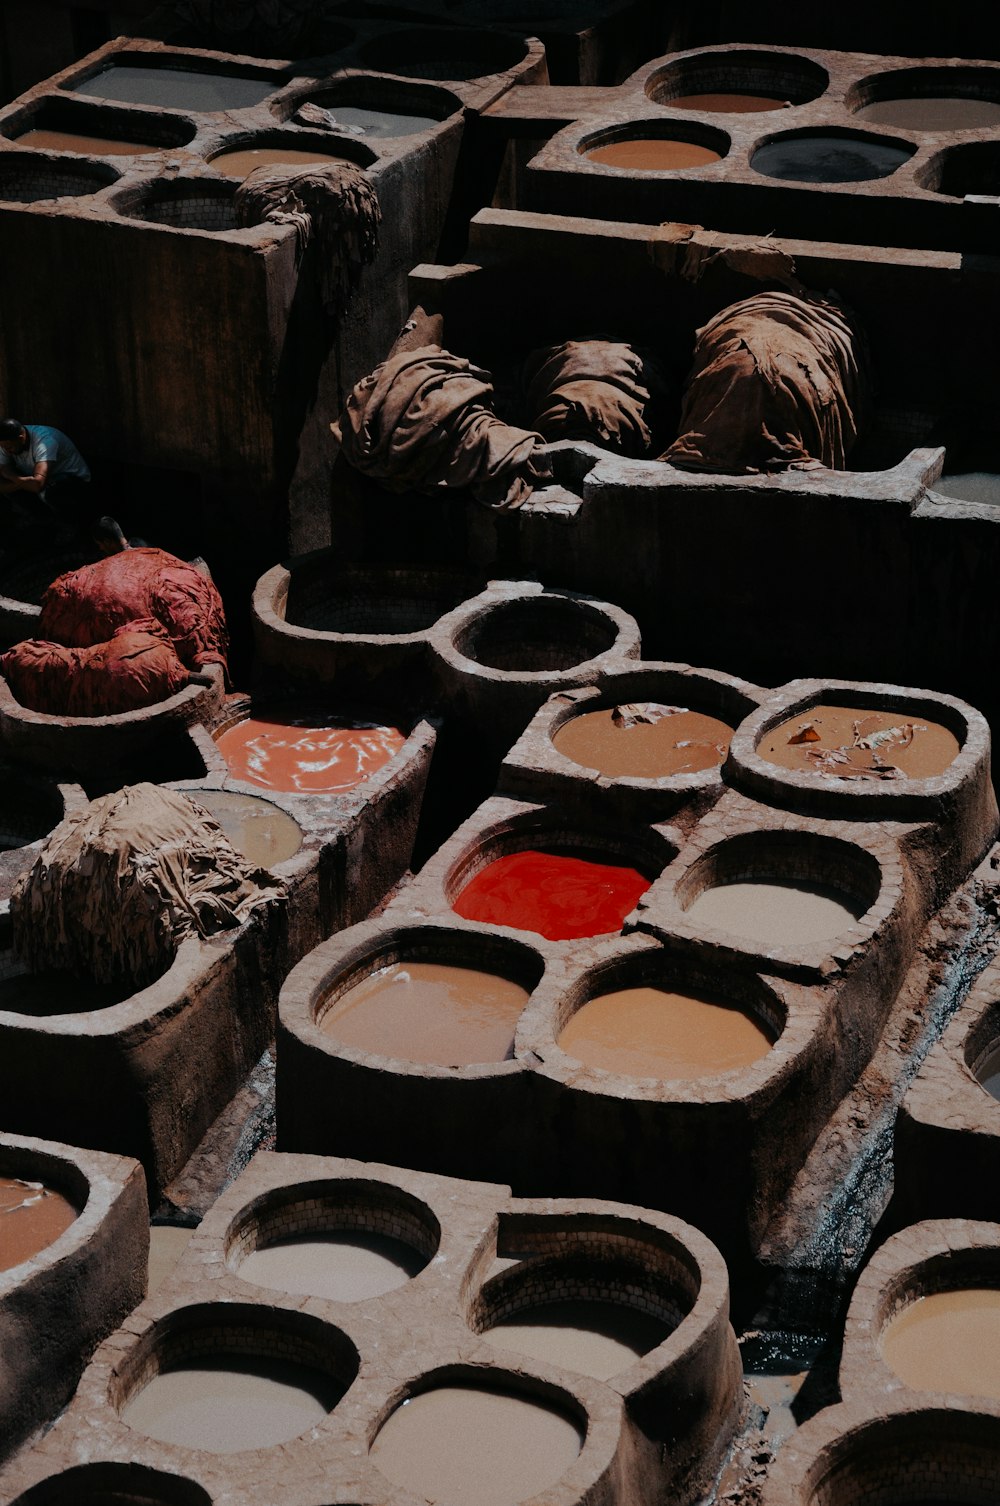 a bunch of pots that are sitting on the ground